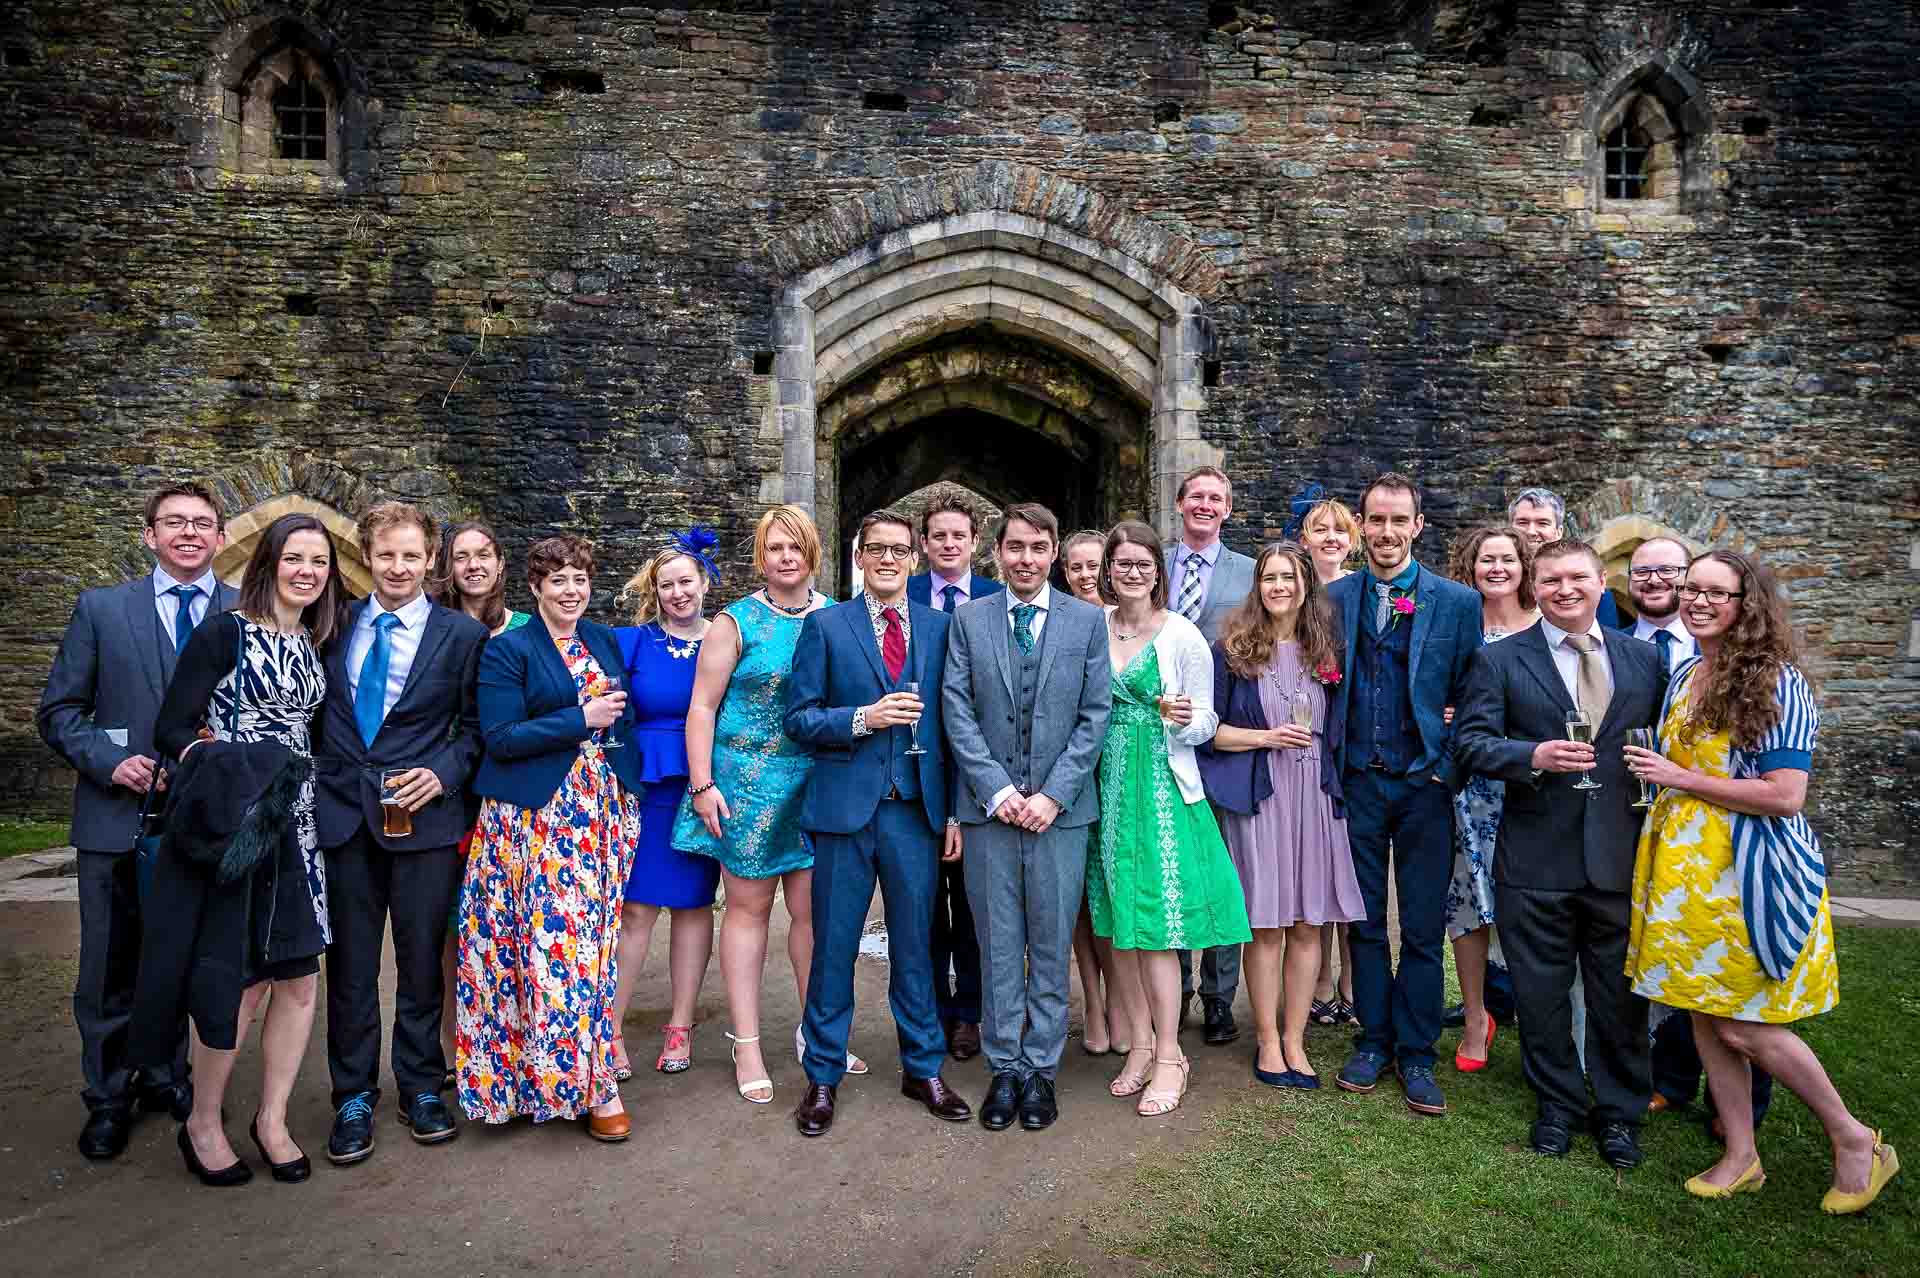 Group Wedding Photograph in the Courtyard at Caerphilly Castle